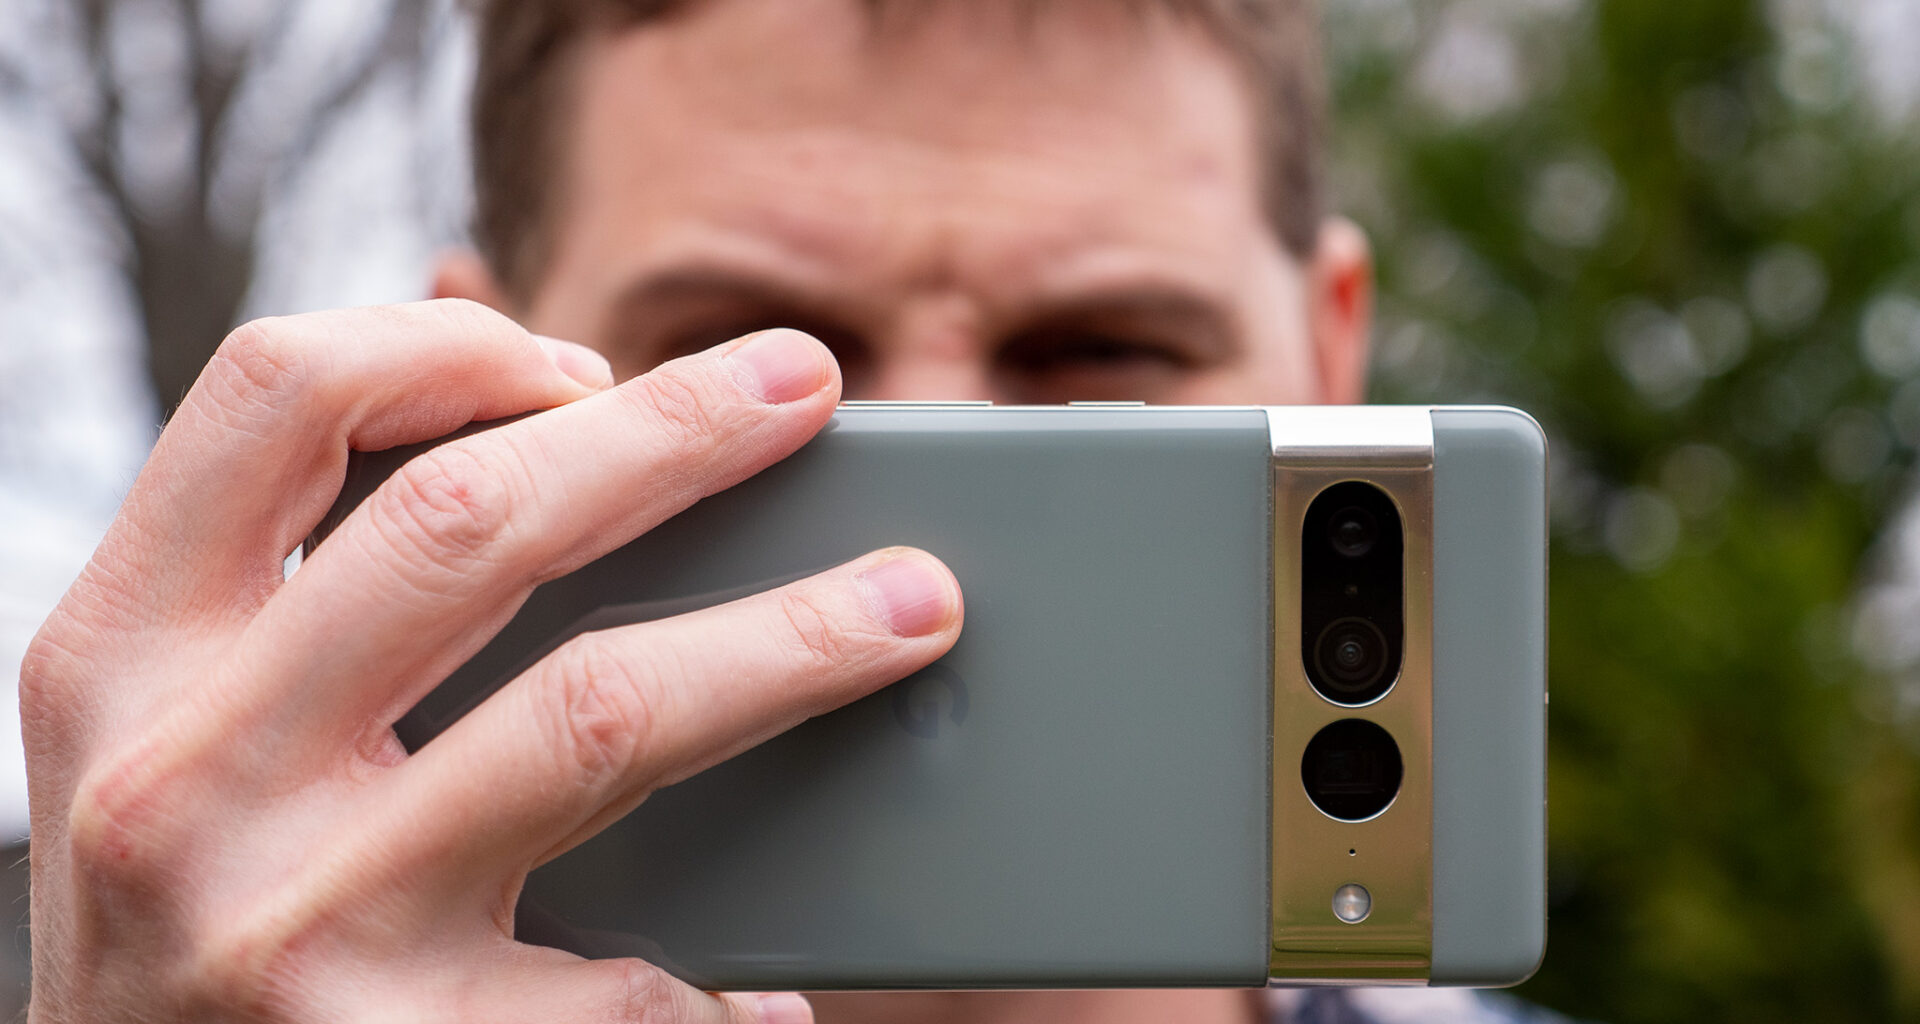 Google Could Soon Let Users Turn Their Android Phones into Webcams